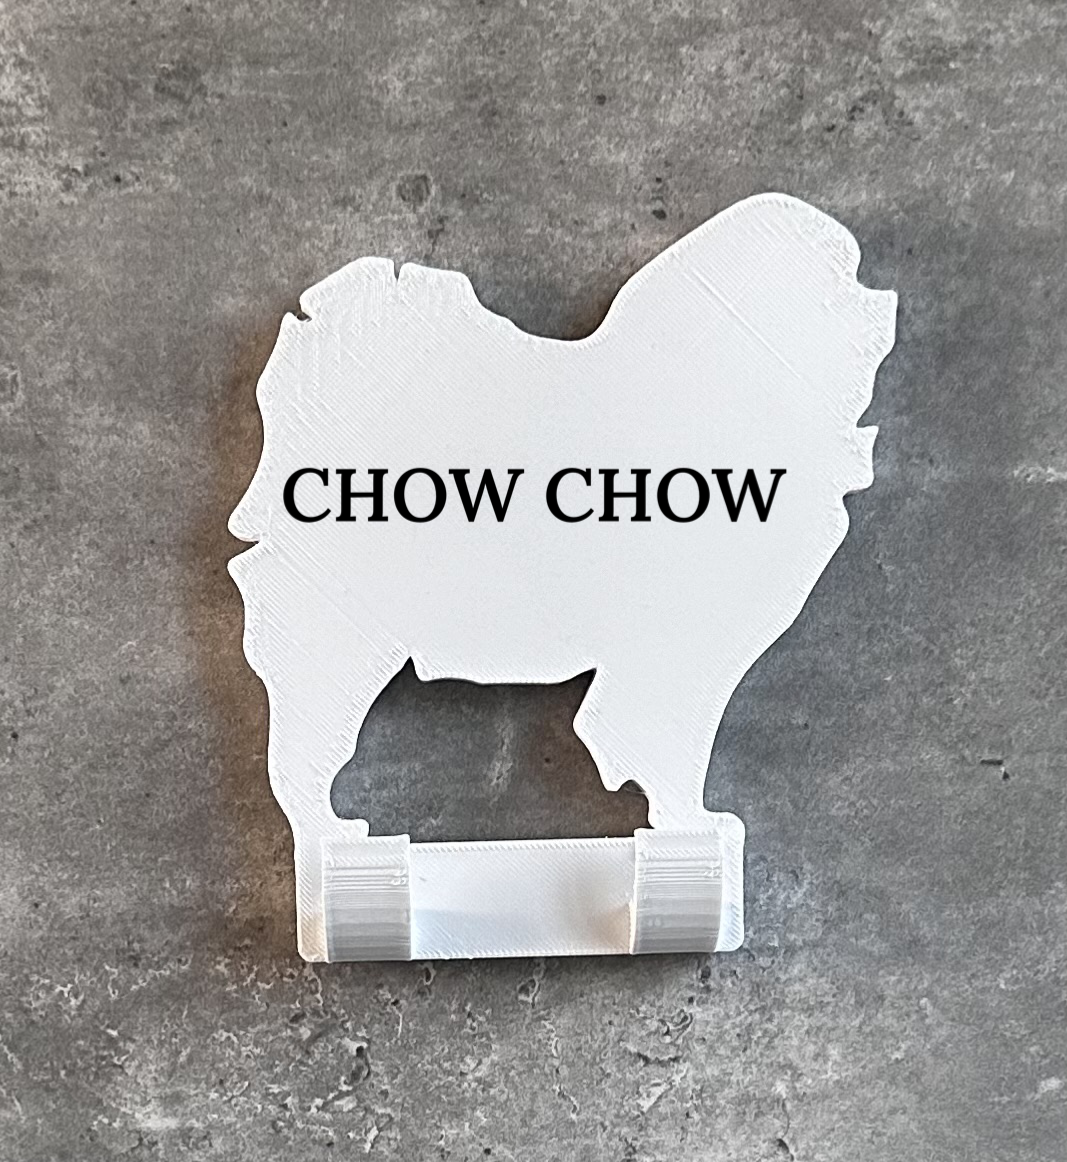 Chow Chow Dog lead hook Stl File | 3D Printed | Unique Personalised Gifts